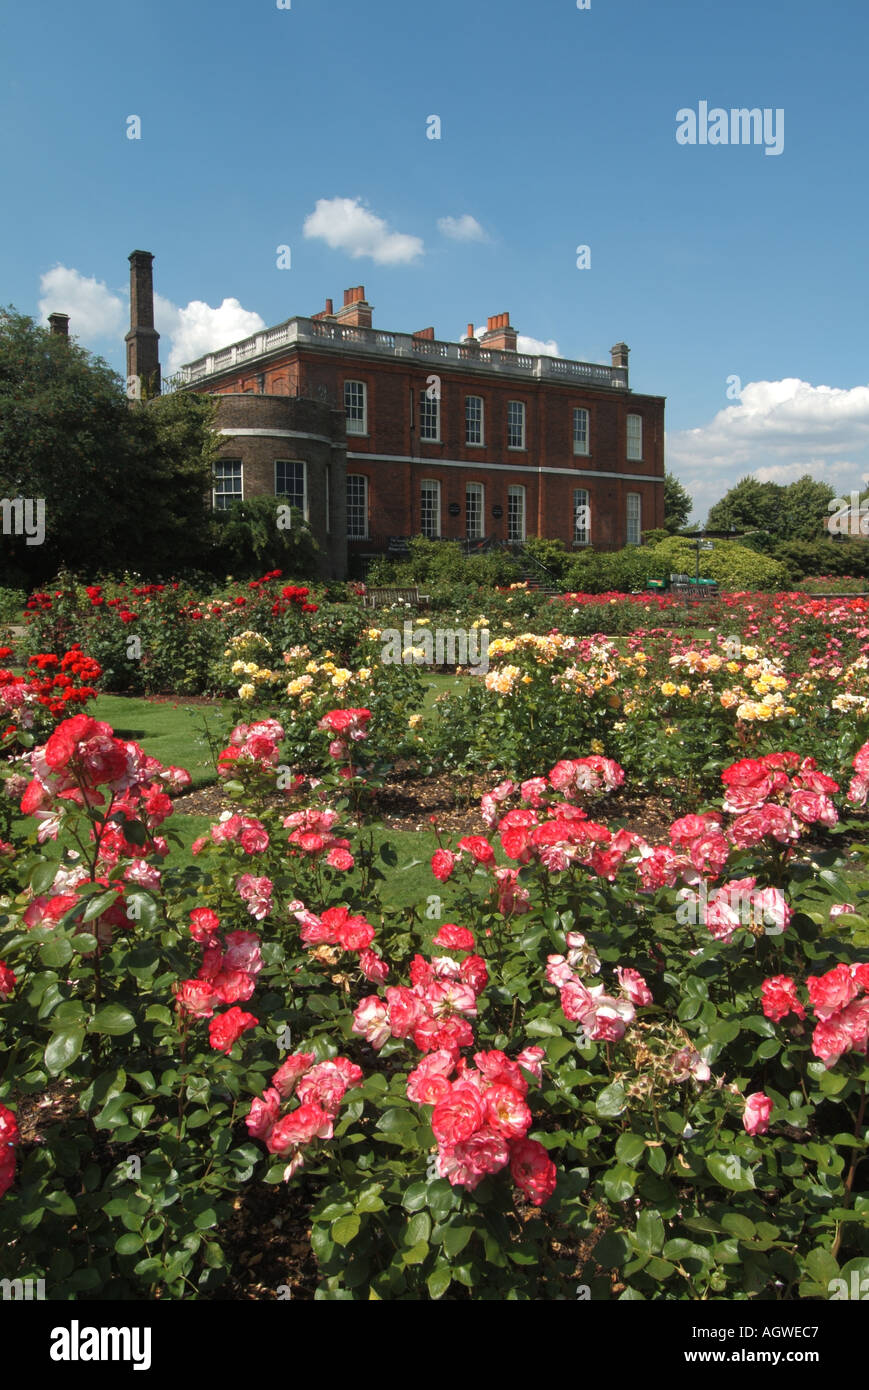 Rose garden & The Rangers House a red brick Palladian style Georgian mansion now home to Wernher art collection Greenwich Park Blackheath London UK Stock Photo